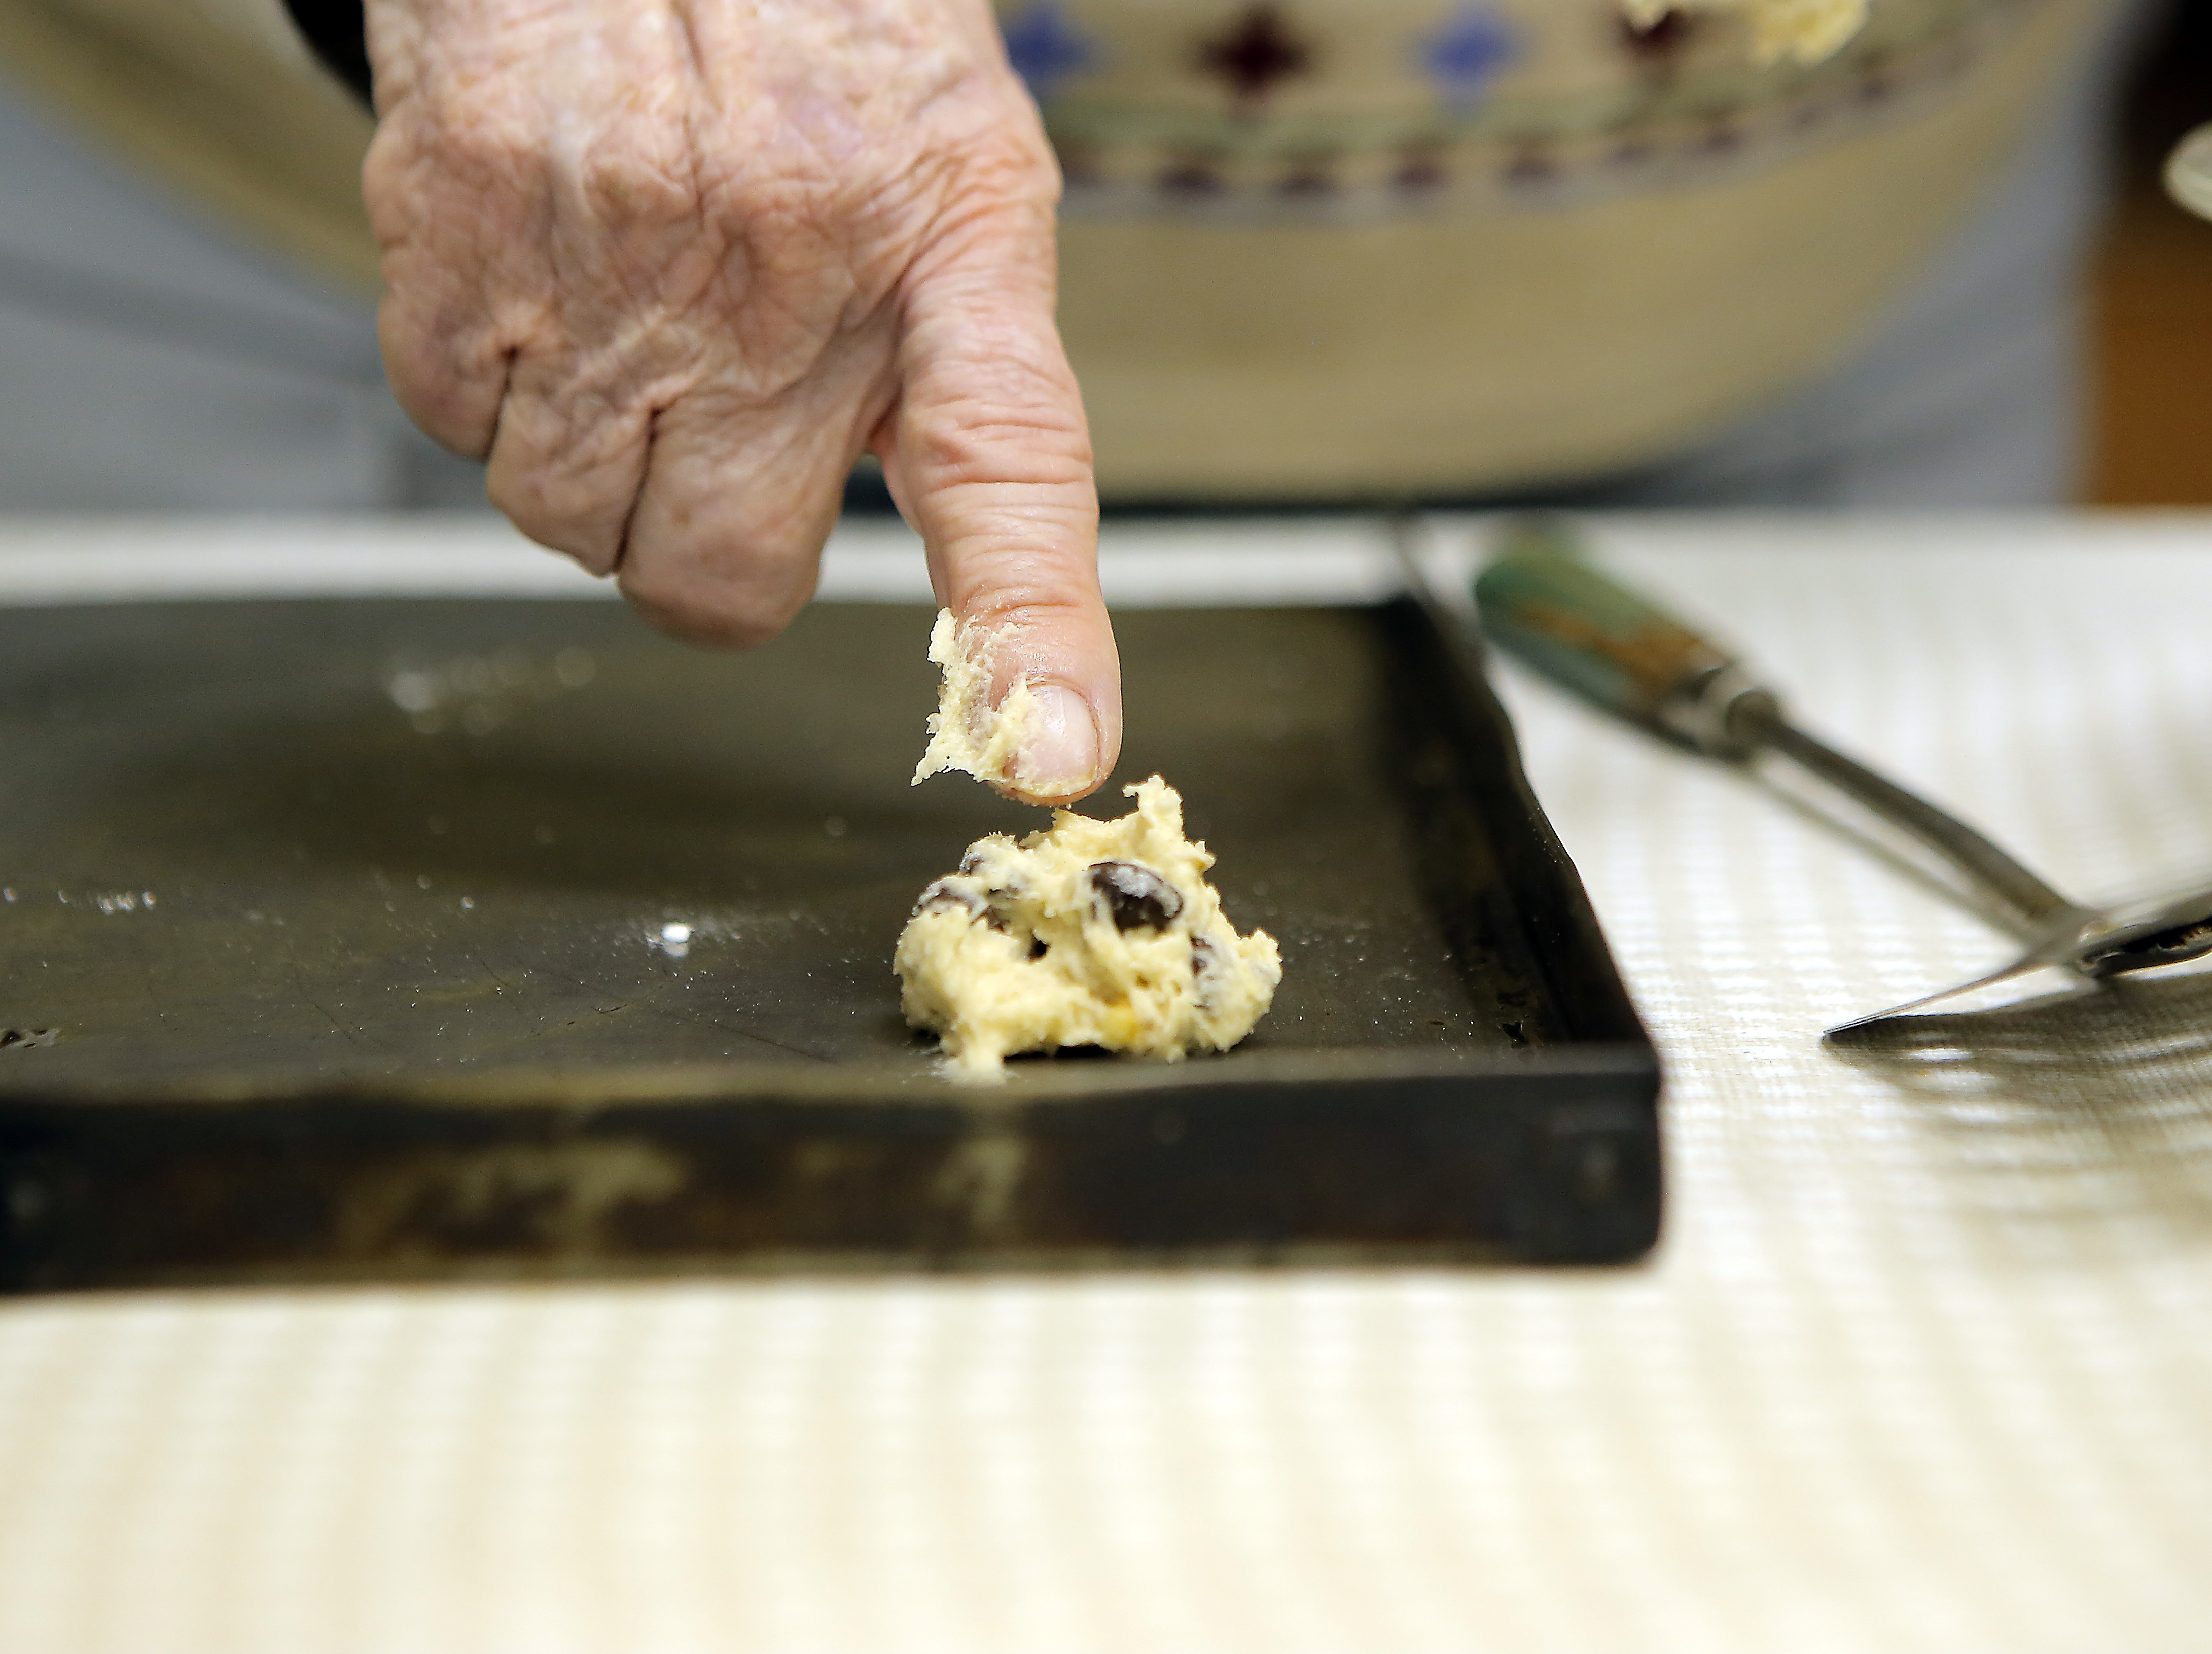 CDC: Salmonella outbreak linked to raw cookie dough